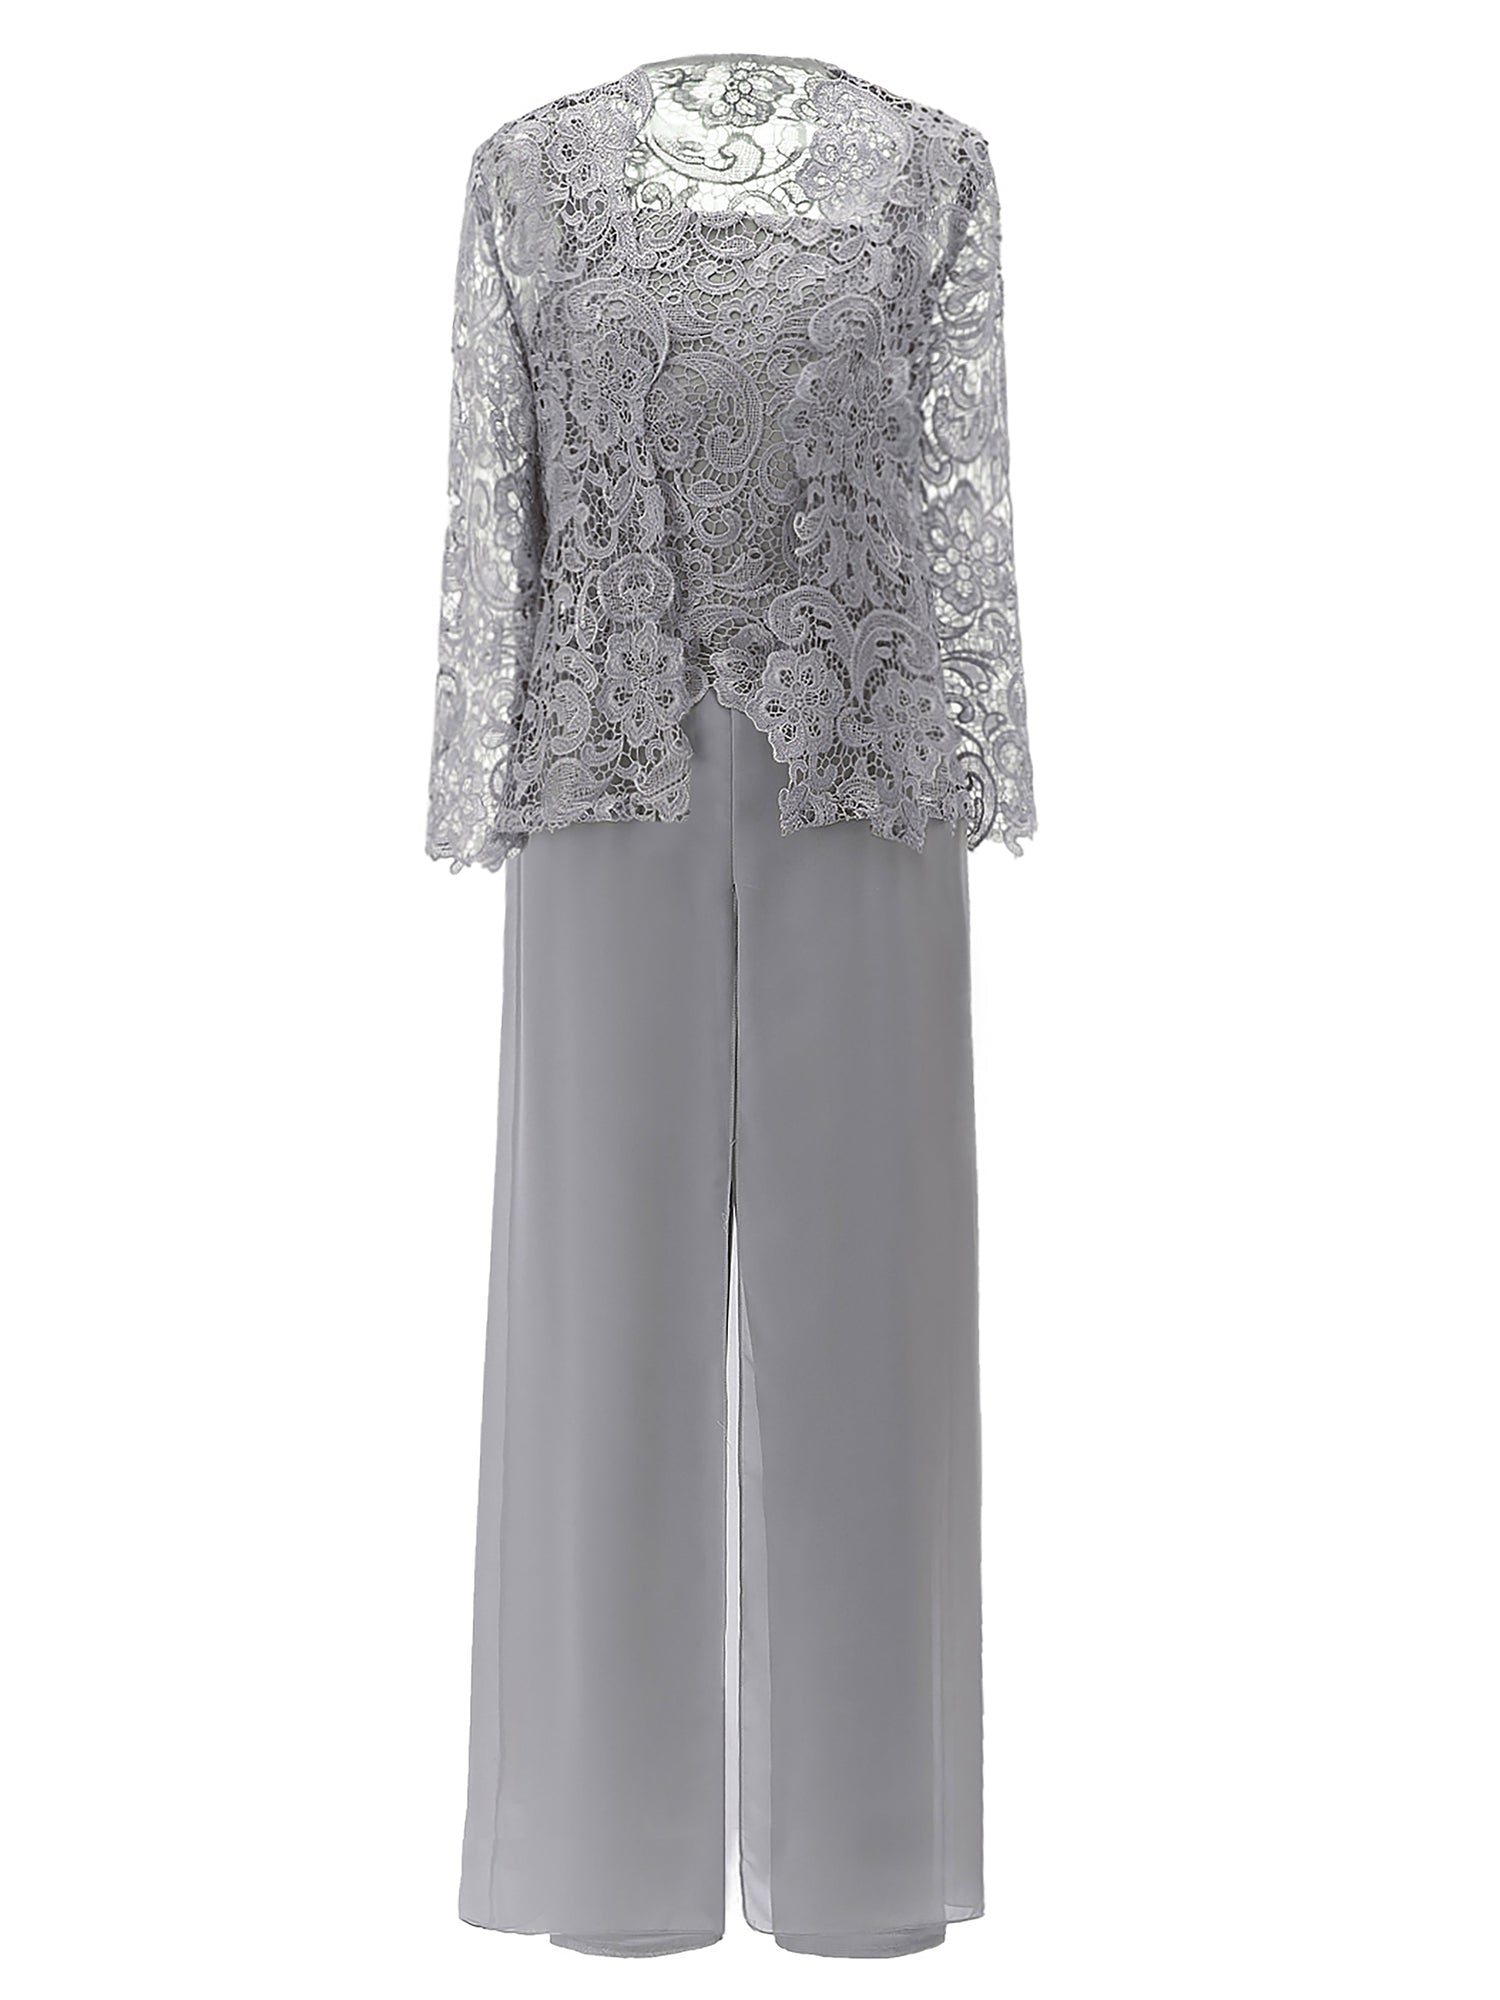 Silver Mother of the Bride Pant Suit for $129.99, – The Dress Outlet